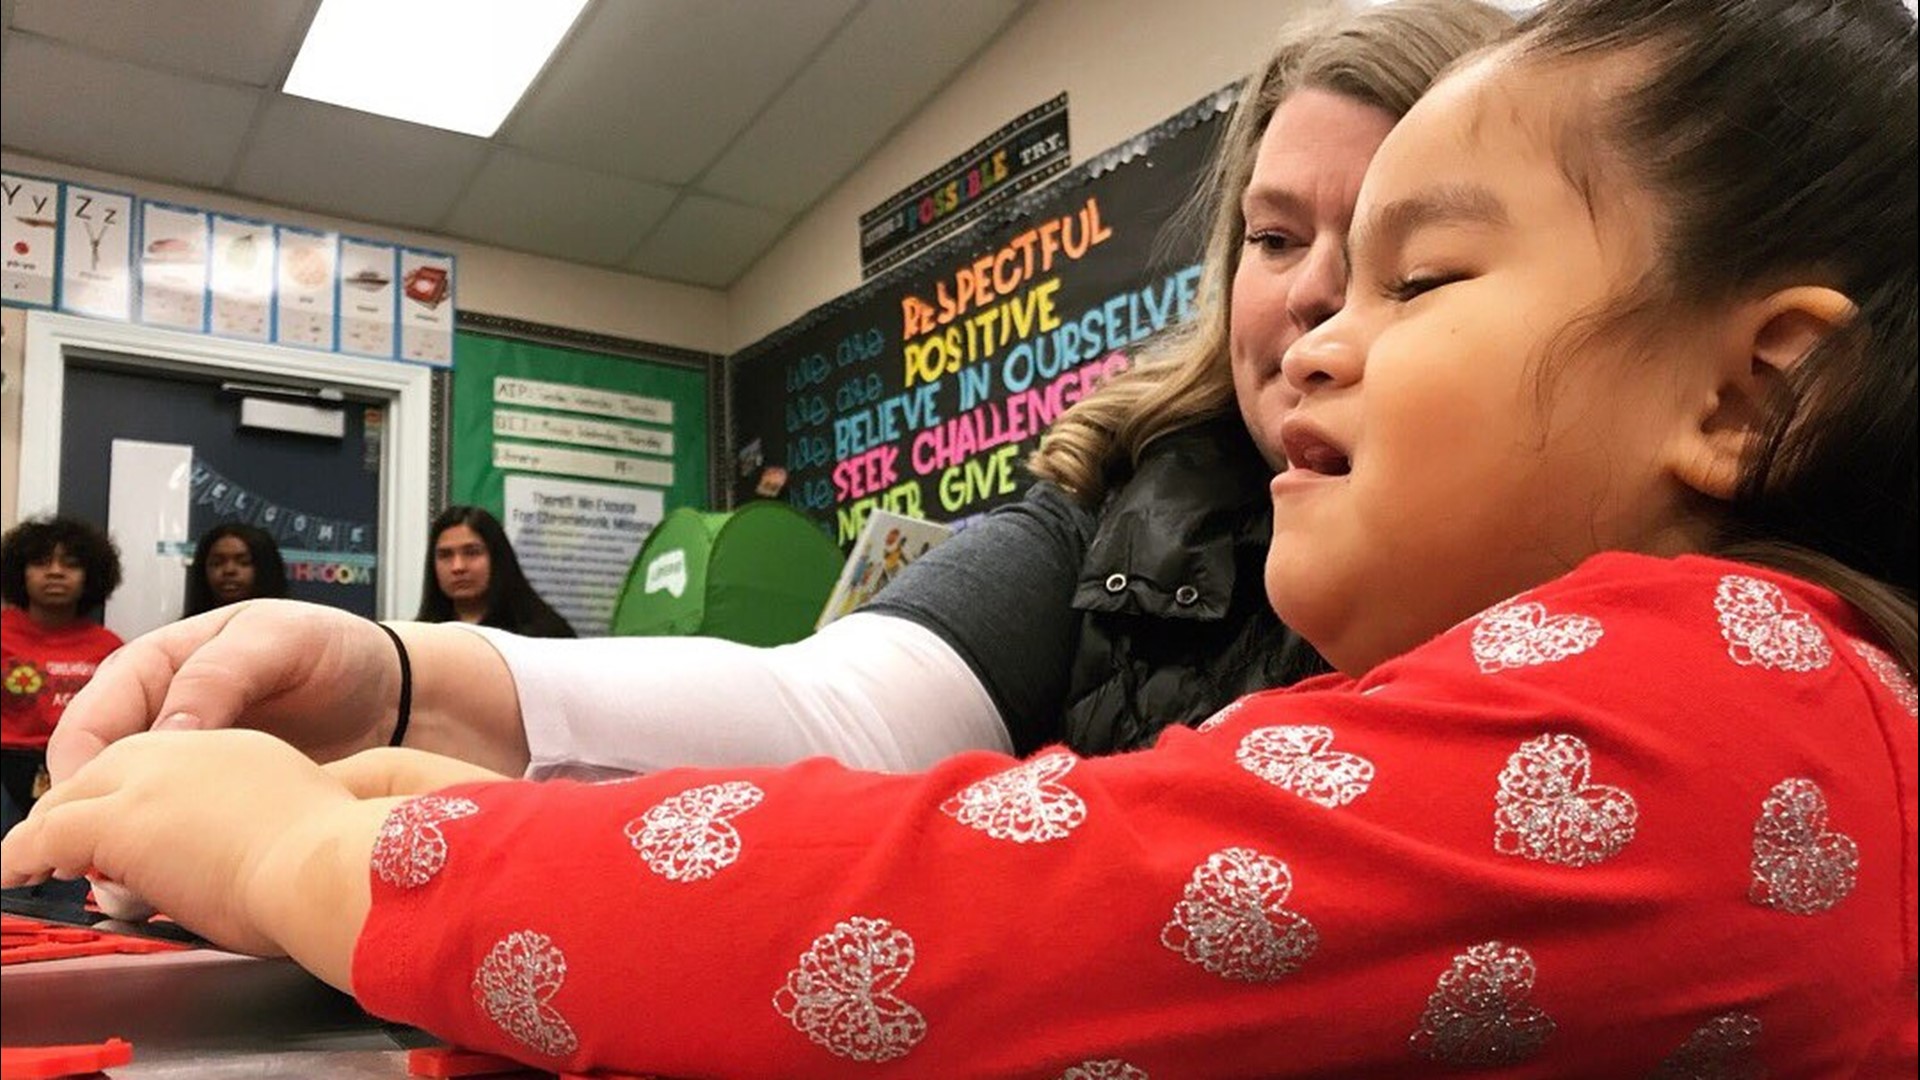 Leila Gonzales, 8, was given a set of 3D-printed magnets by a group of students from Ceres High School. Leila is impaired, so the Ceres Unified School District hopes these will support her learning in the same environment as her 2nd grade classmates.